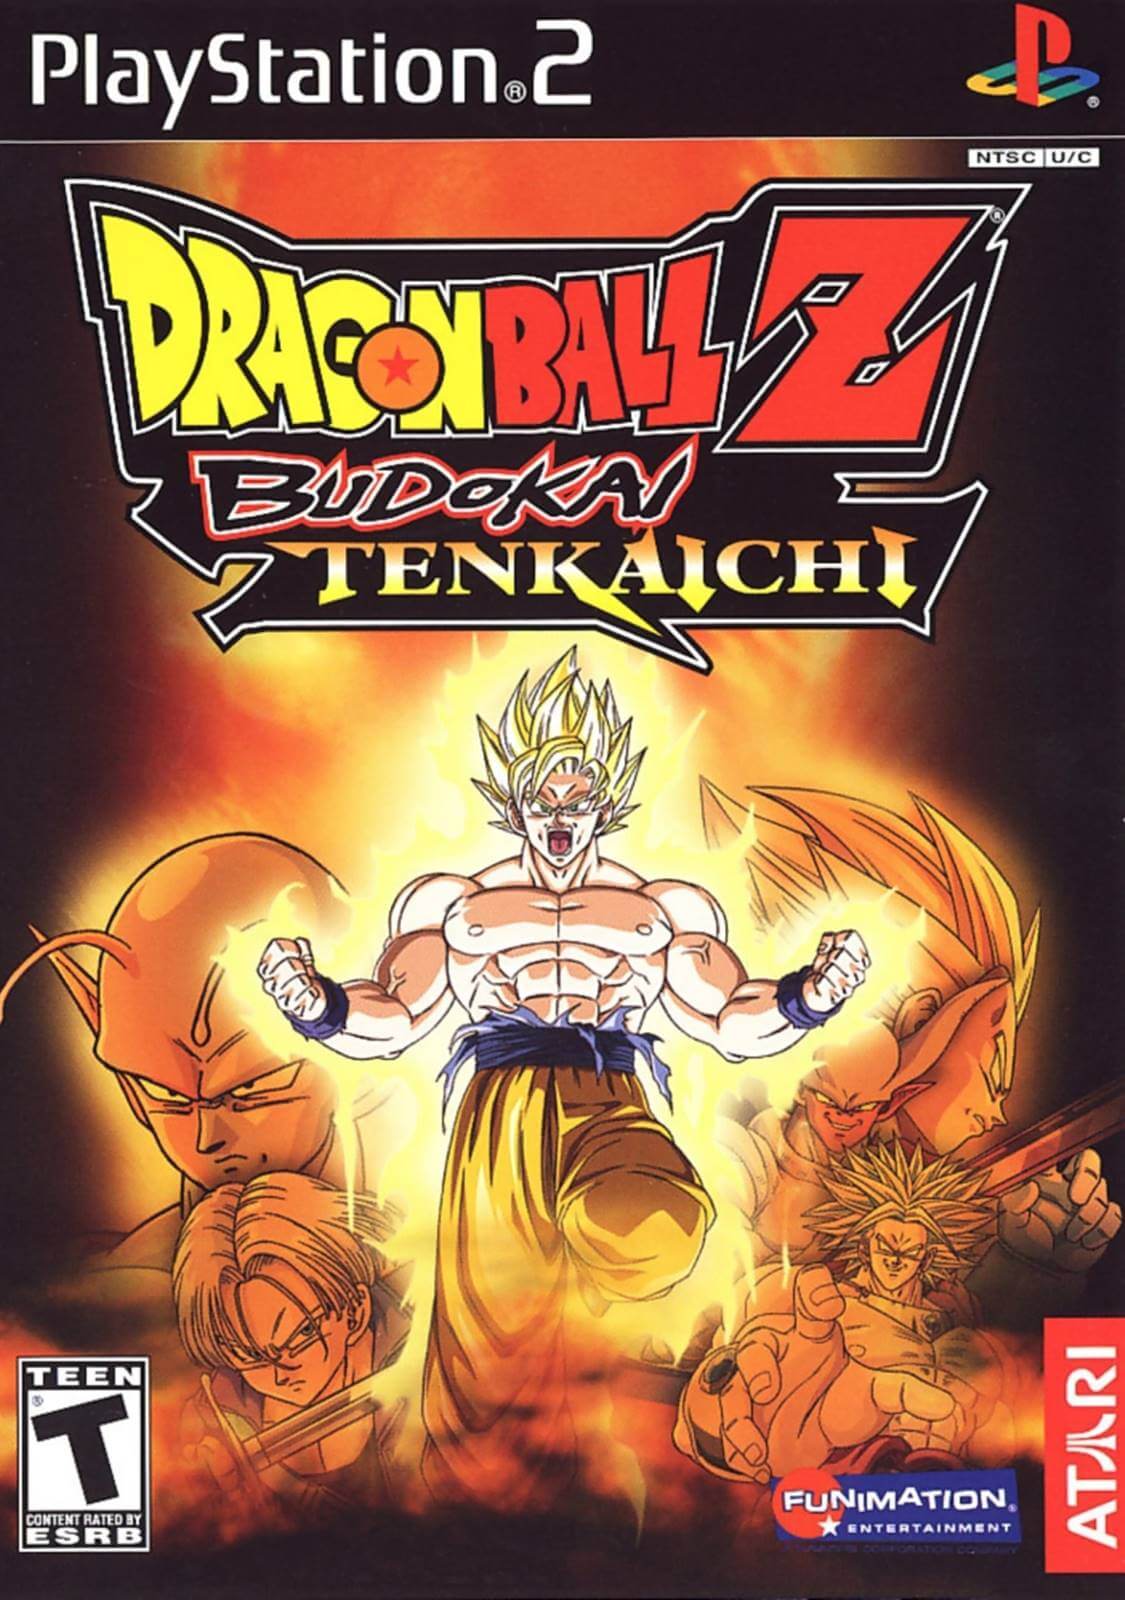 Super Dragon Ball Z - Playstation 2(PS2 ISOs) ROM Download